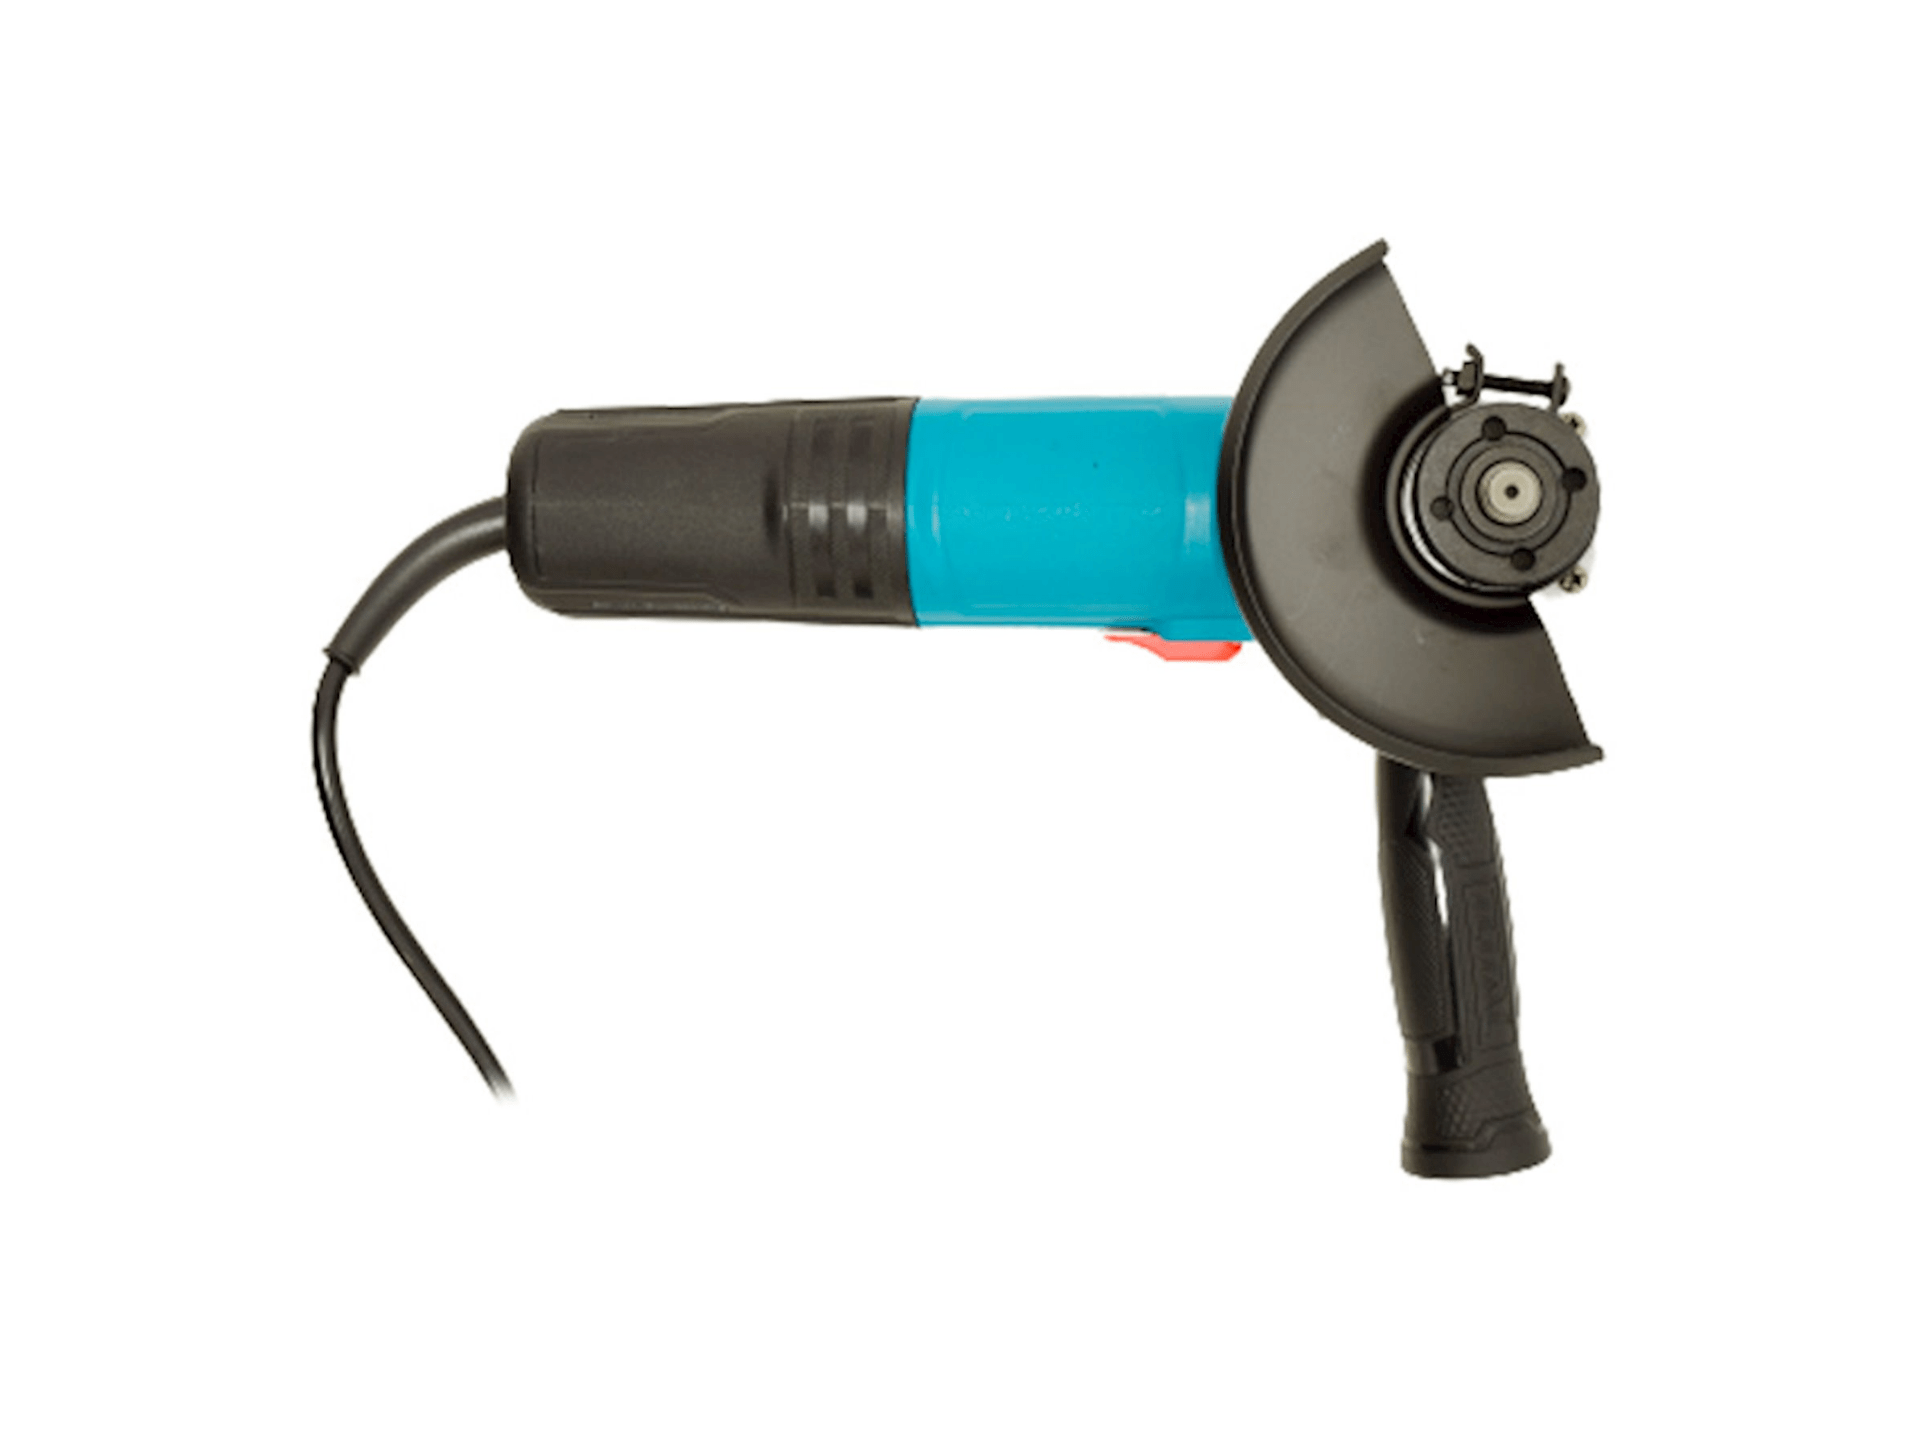 Total 4.5"/115mm Angle Grinder 750W - TG10711556 | Supply Master Accra, Ghana Grinder Buy Tools hardware Building materials